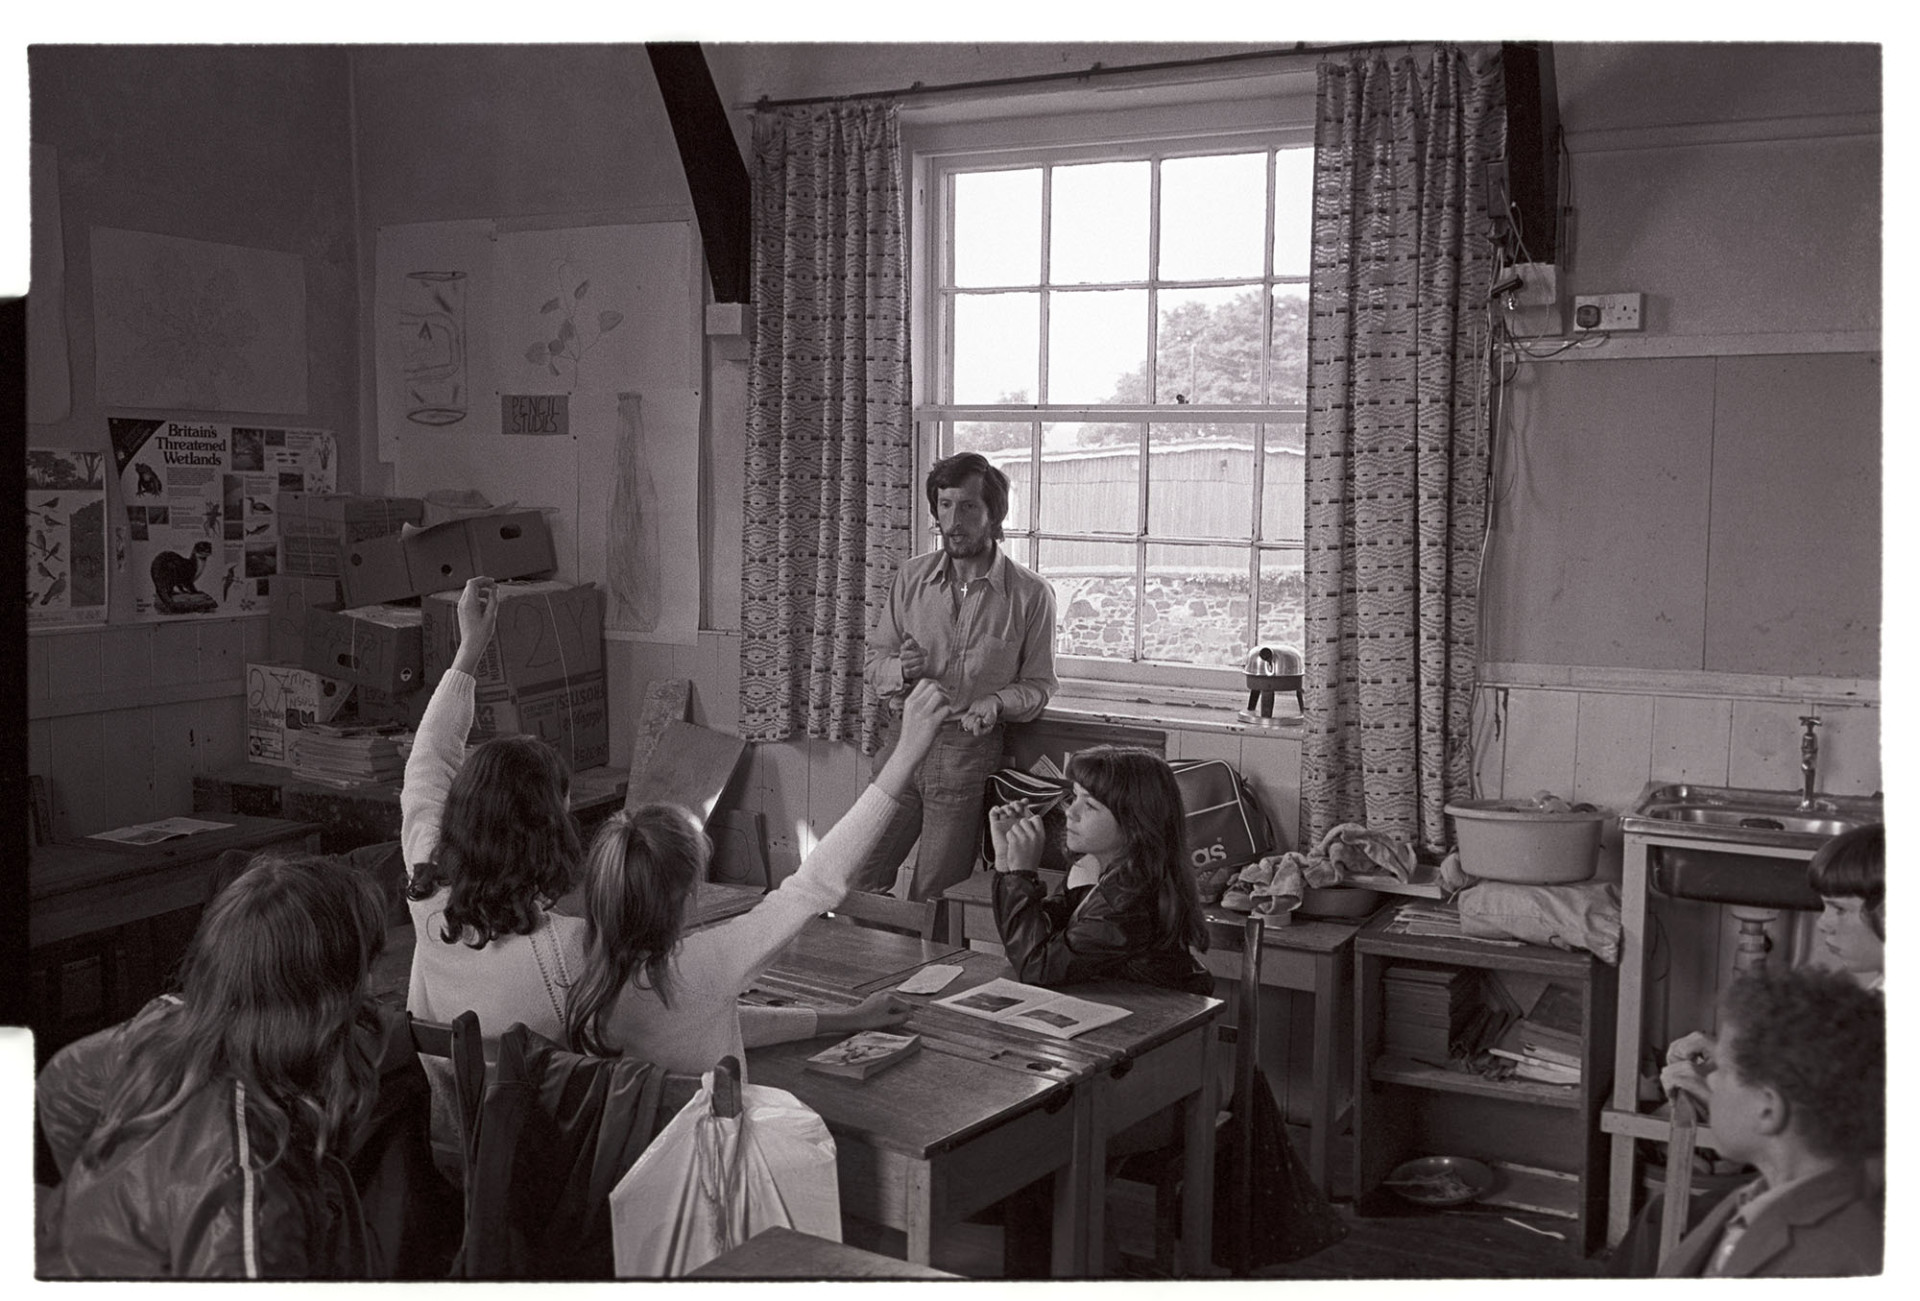 Schoolchildren and teacher in class, answering questions.
[Children in a classroom sitting at desks and holding up hands to answer questions.  A teacher is standing by a window in the classroom and talking, at Blue Coats School Torrington.]